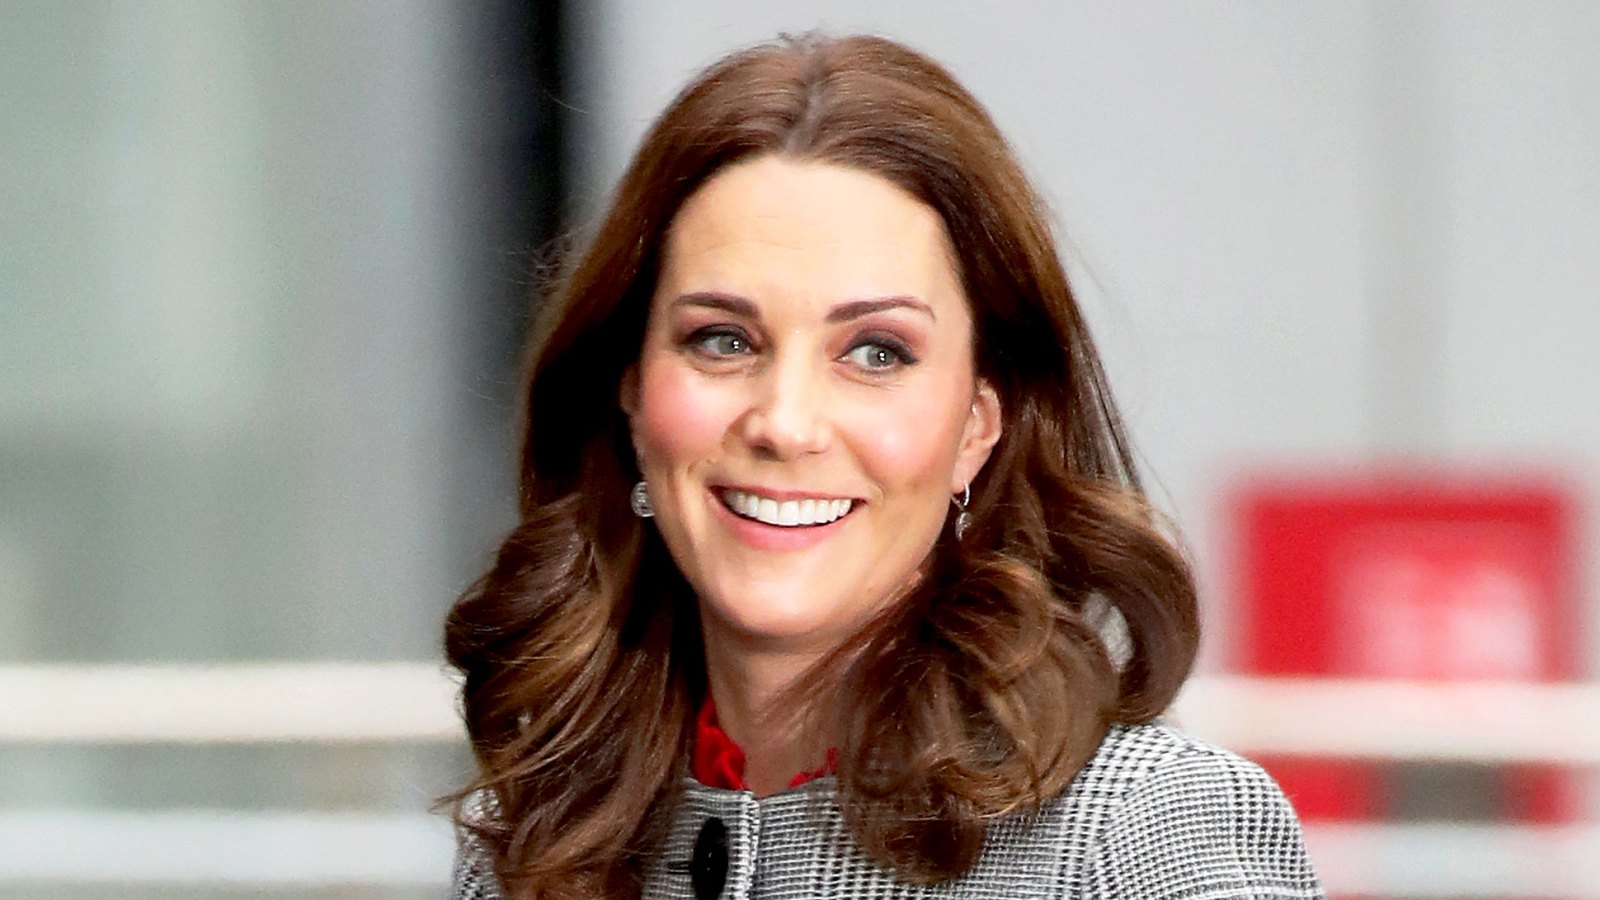 Catherine, Duchess of Cambridge attends a 'Stepping Out' session at Media City on December 6, 2017 in Manchester, England.